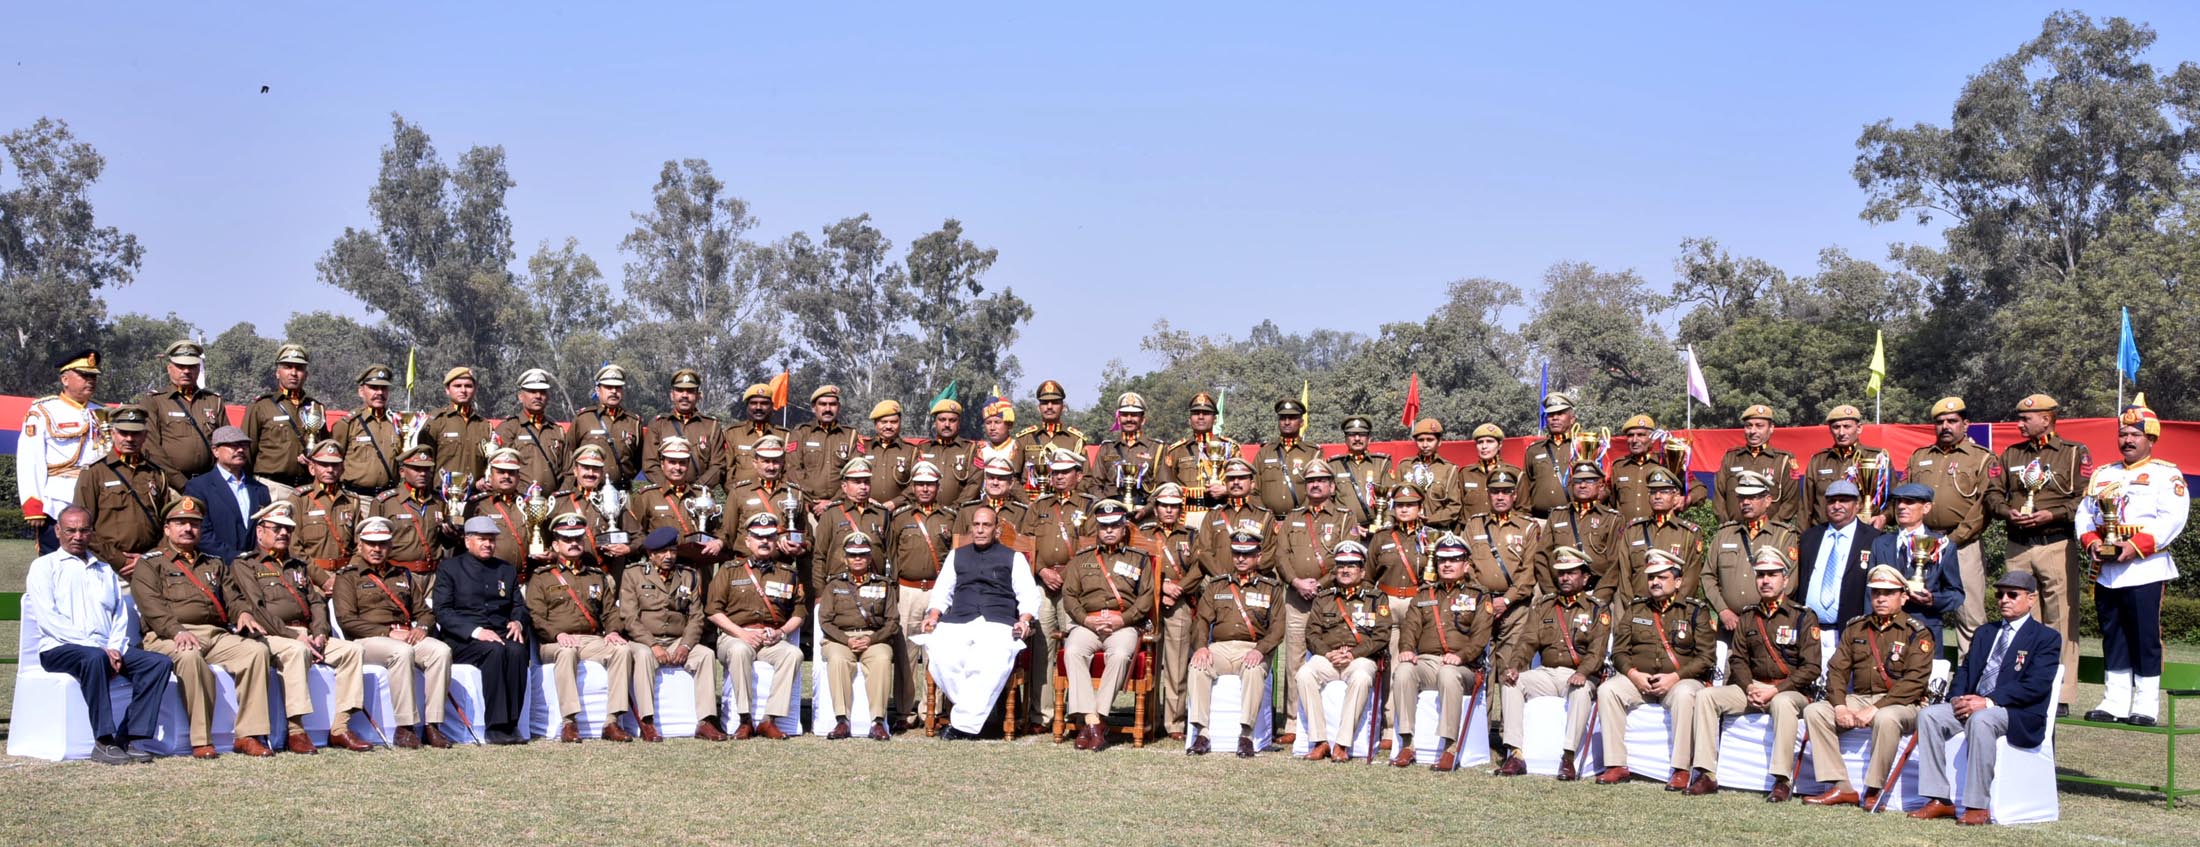 The Union Home Minister, Shri Rajnath Singh in a group photograph with the Delhi Police personnel on the occasion of 69th Raising Day function of Delhi Police, in New Delhi on February 16, 2016.  	The Police Commissioner of Delhi, Shri B.S. Bassi is also seen.